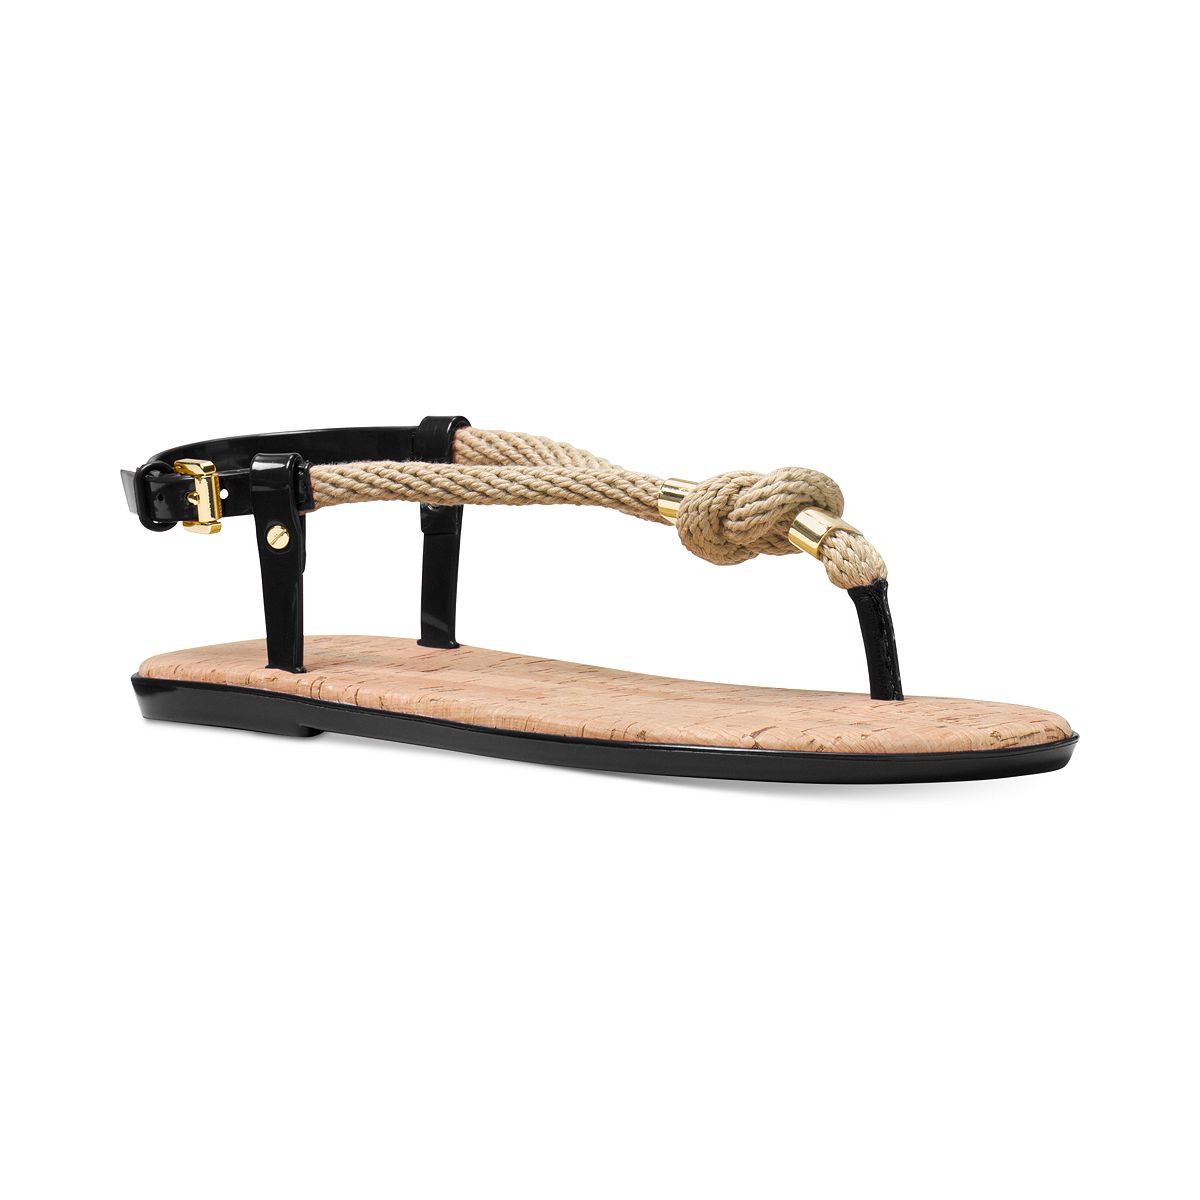 MICHAEL Michael Kors Outet Holly Jelly Sandals Black